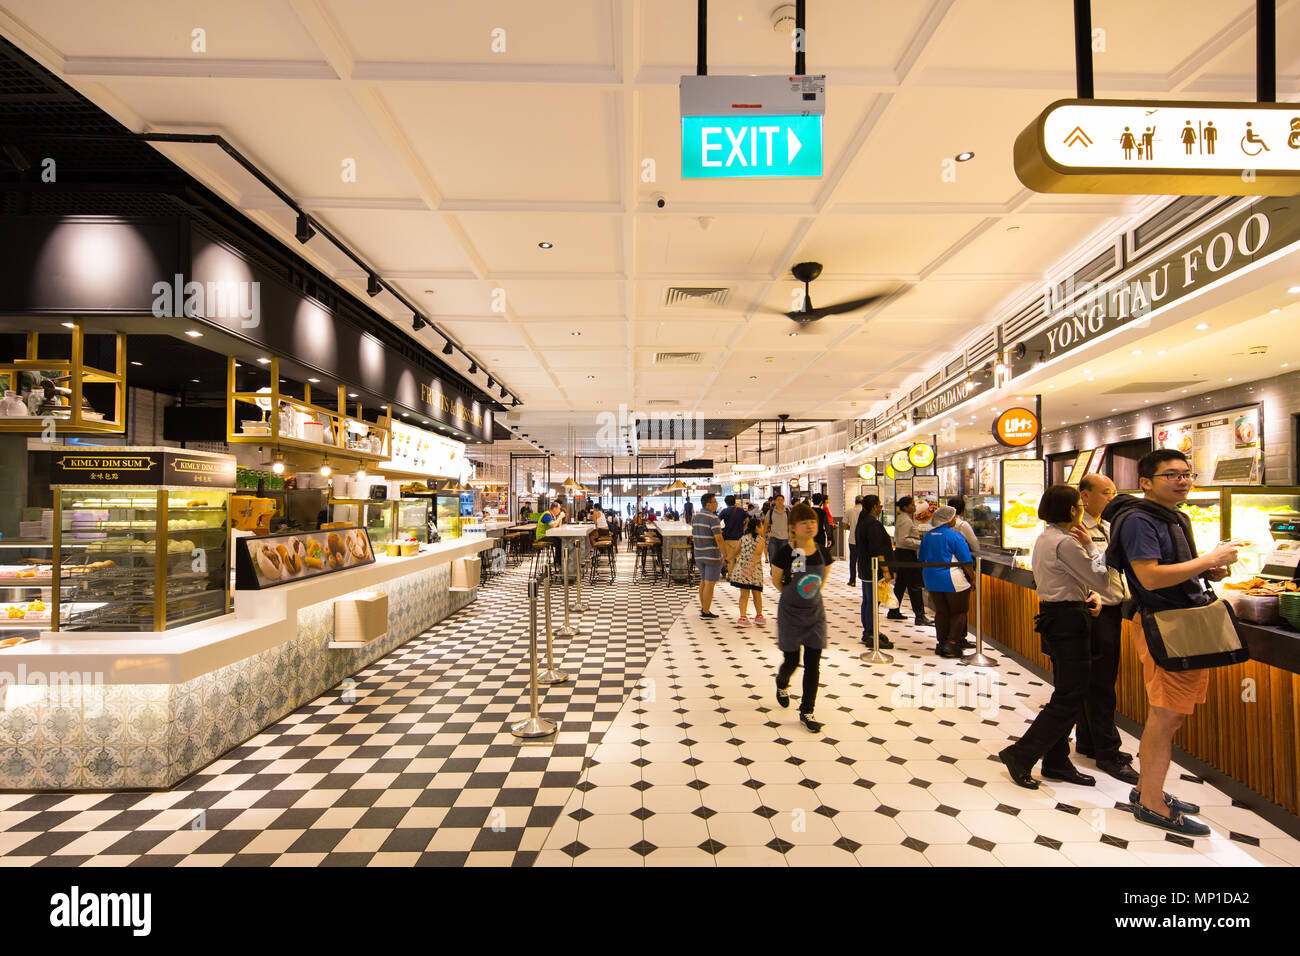 Interior design of Food Emporium or commonly know as food court or dinning area at Singapore Changi Airport terminal 4. Stock Photo